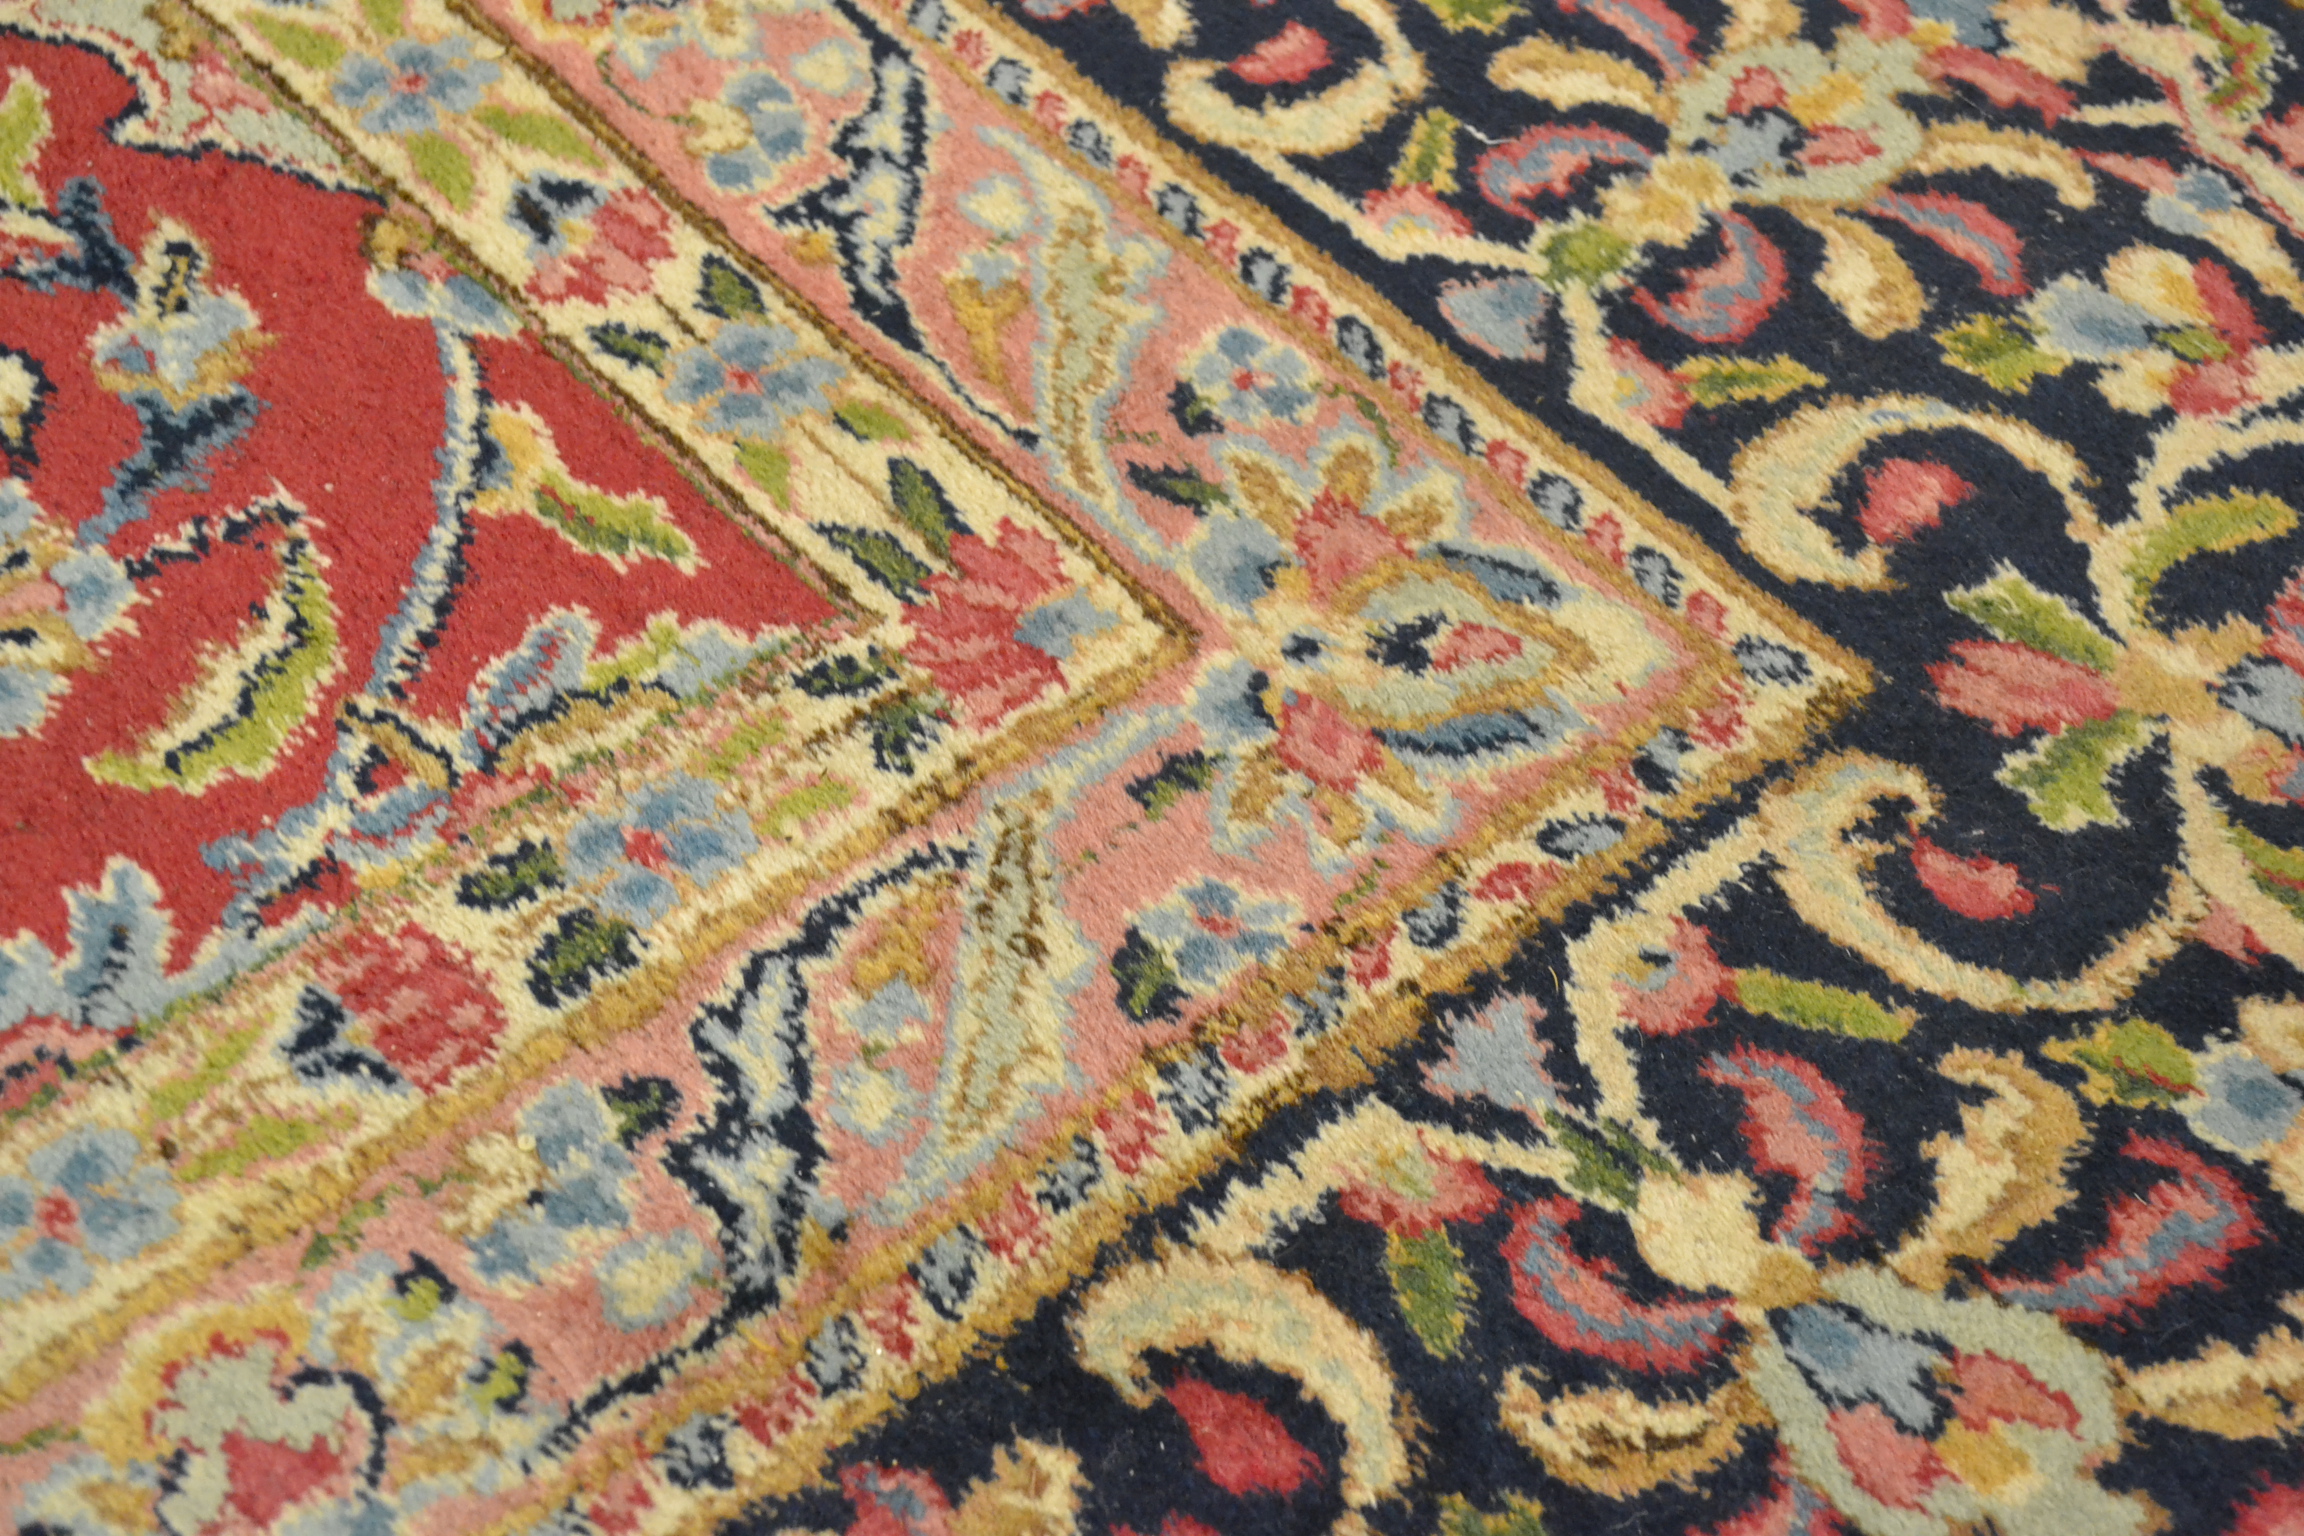 Kirman carpet, South East Persia, the raspberry field of scrolling vines around a floral medallion - Image 7 of 7